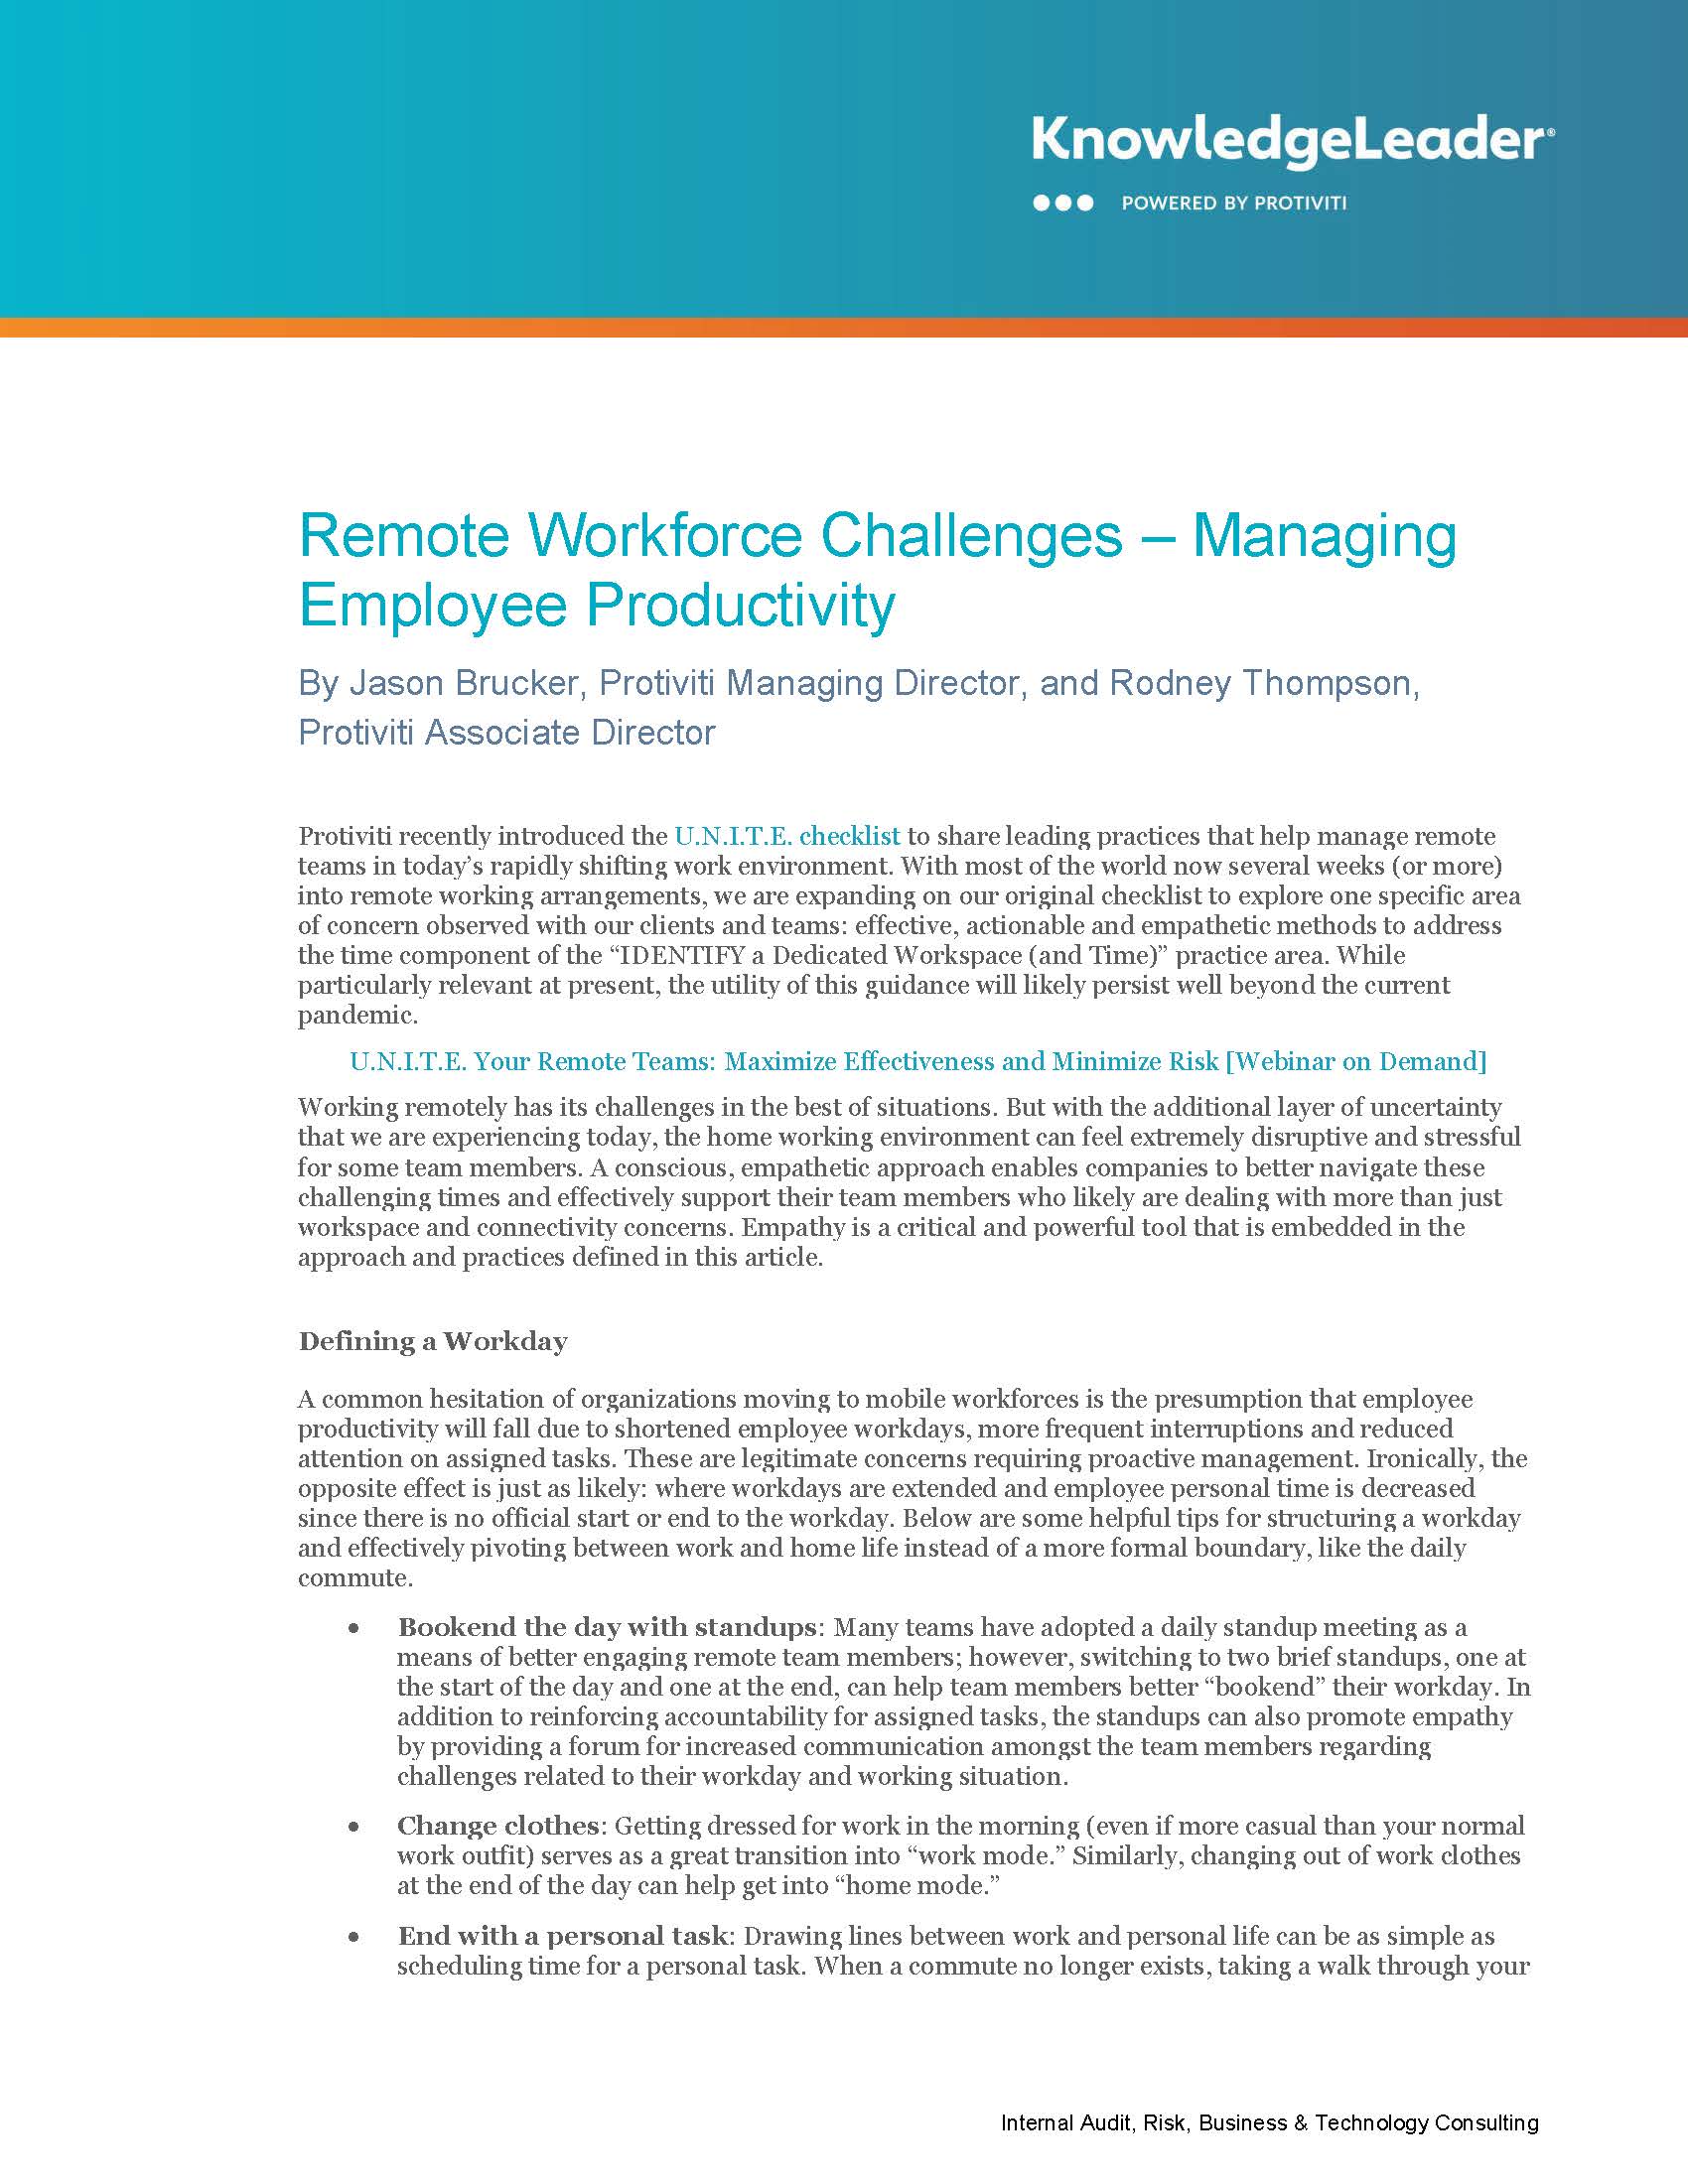 Remote Workforce Challenges — Managing Employee Productivity